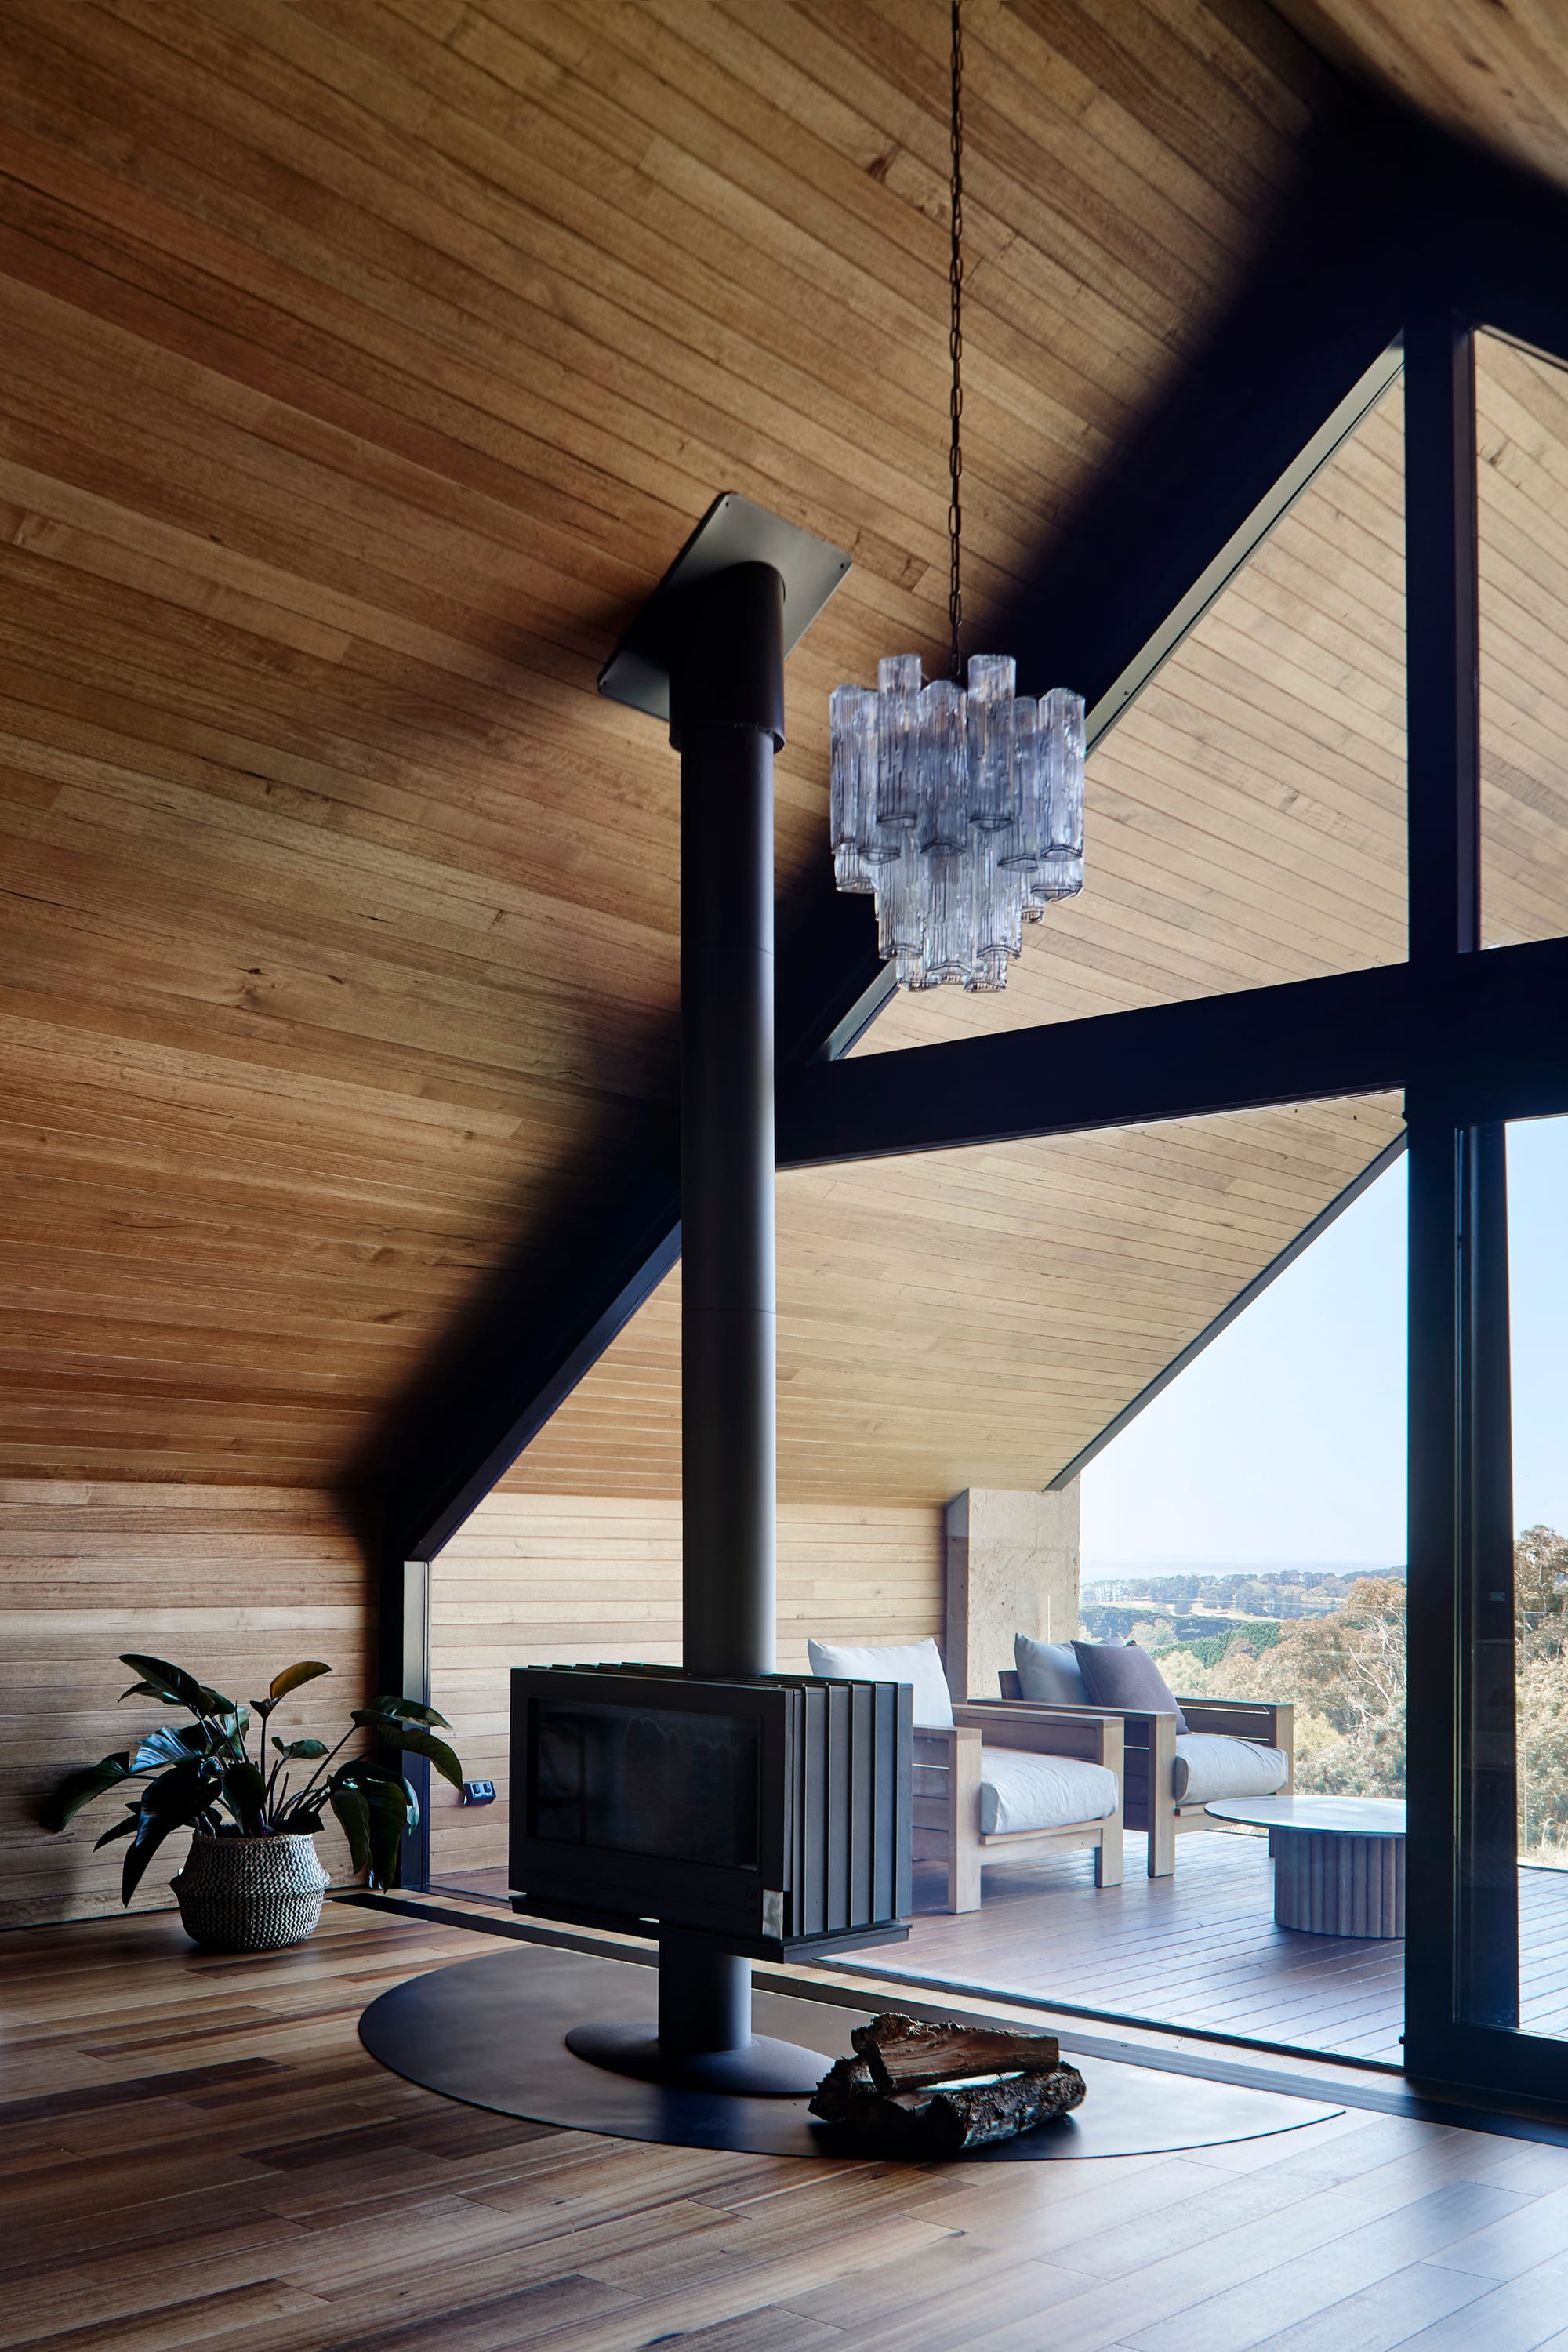 Flinders Residence by Abe McCarthy Architects showing an interior with a feature fireplace and a timber lined ceiling